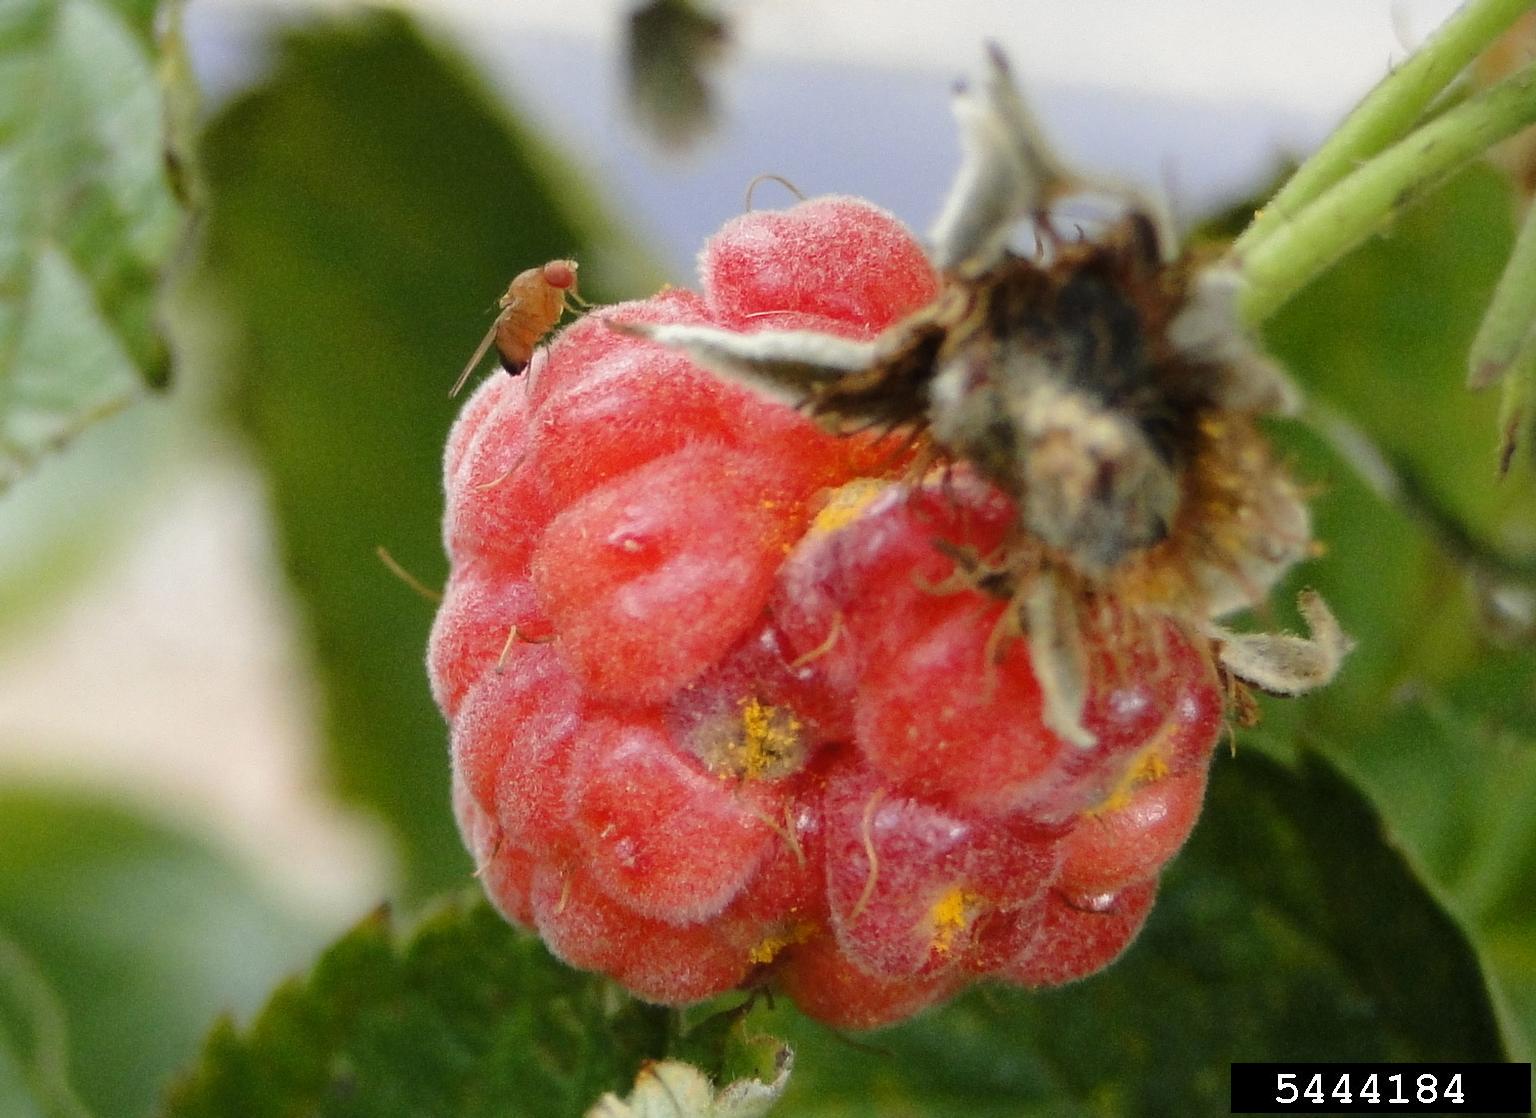 A raspberry with a small brown fly on the surface